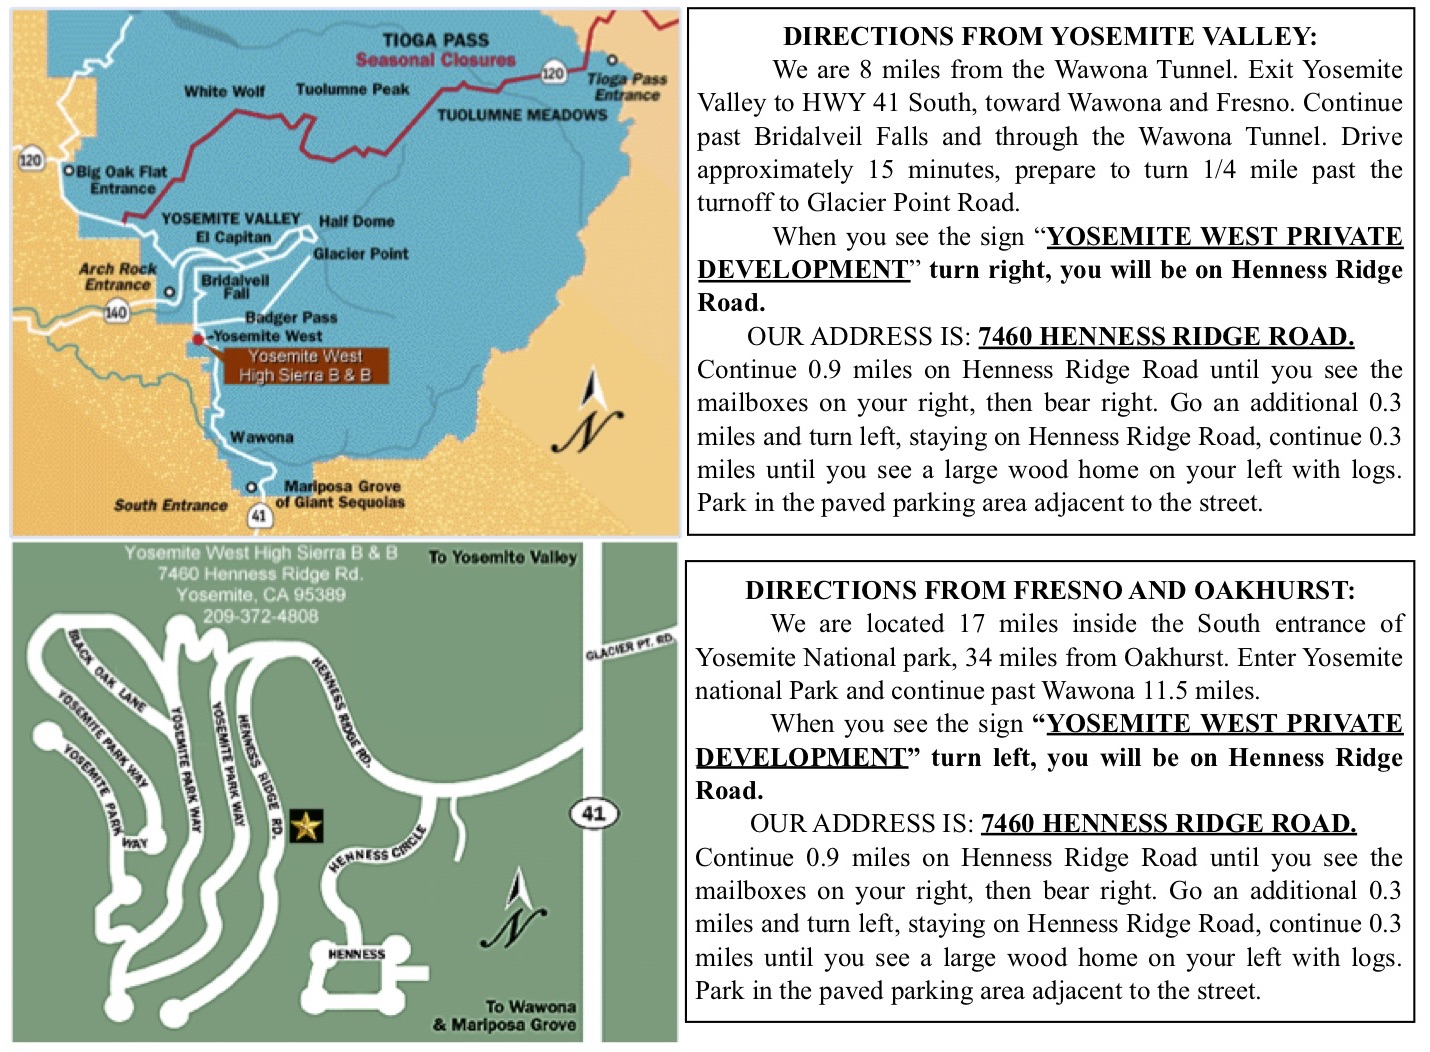 Map and Directions to Yosemite West High Sierra B & B